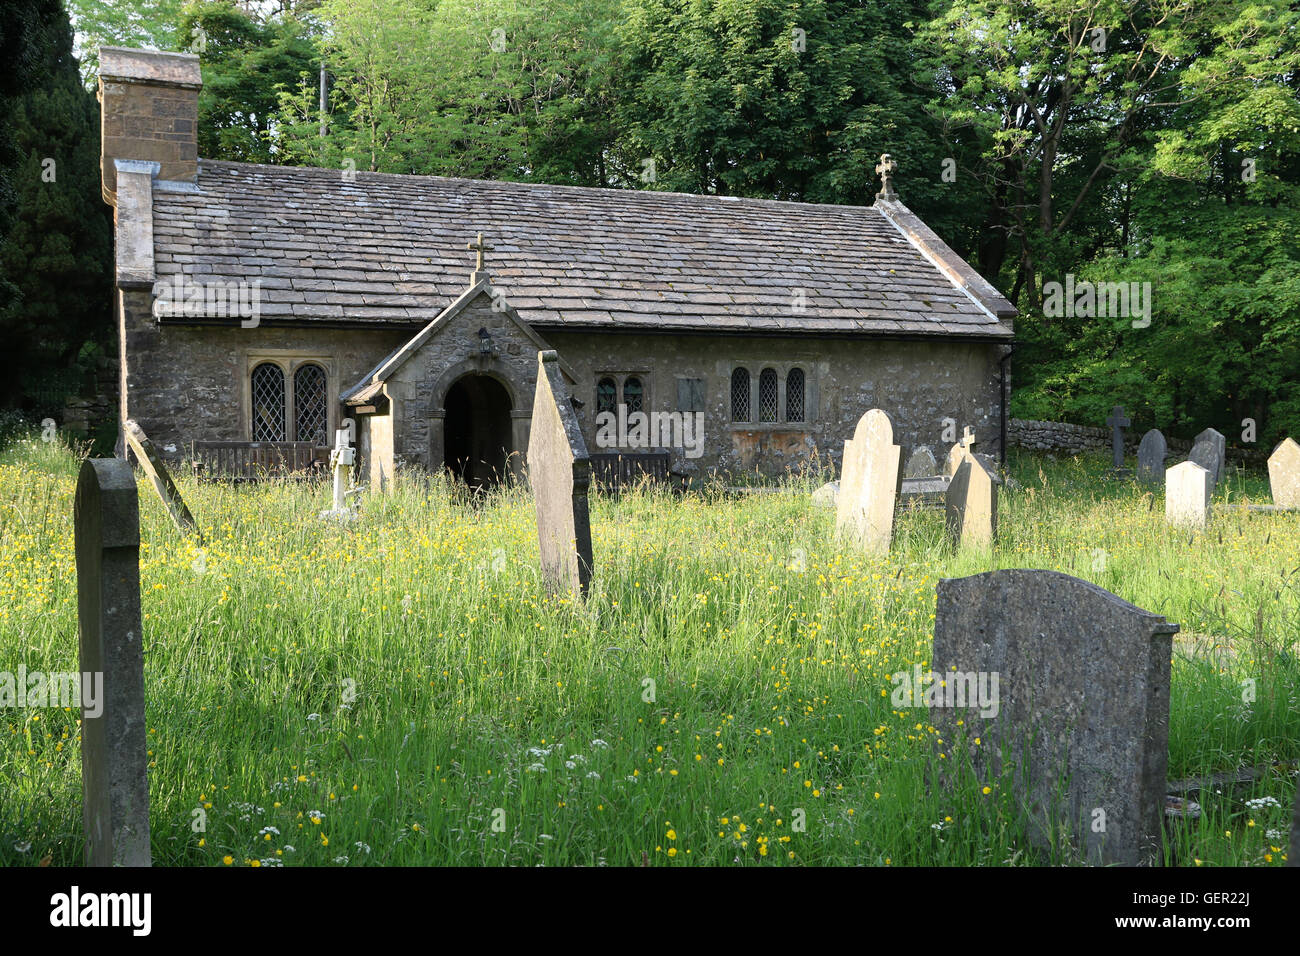 The old church of St. Leonard's in Chapel-le-Dale, North Yorkshire, England. Stock Photo